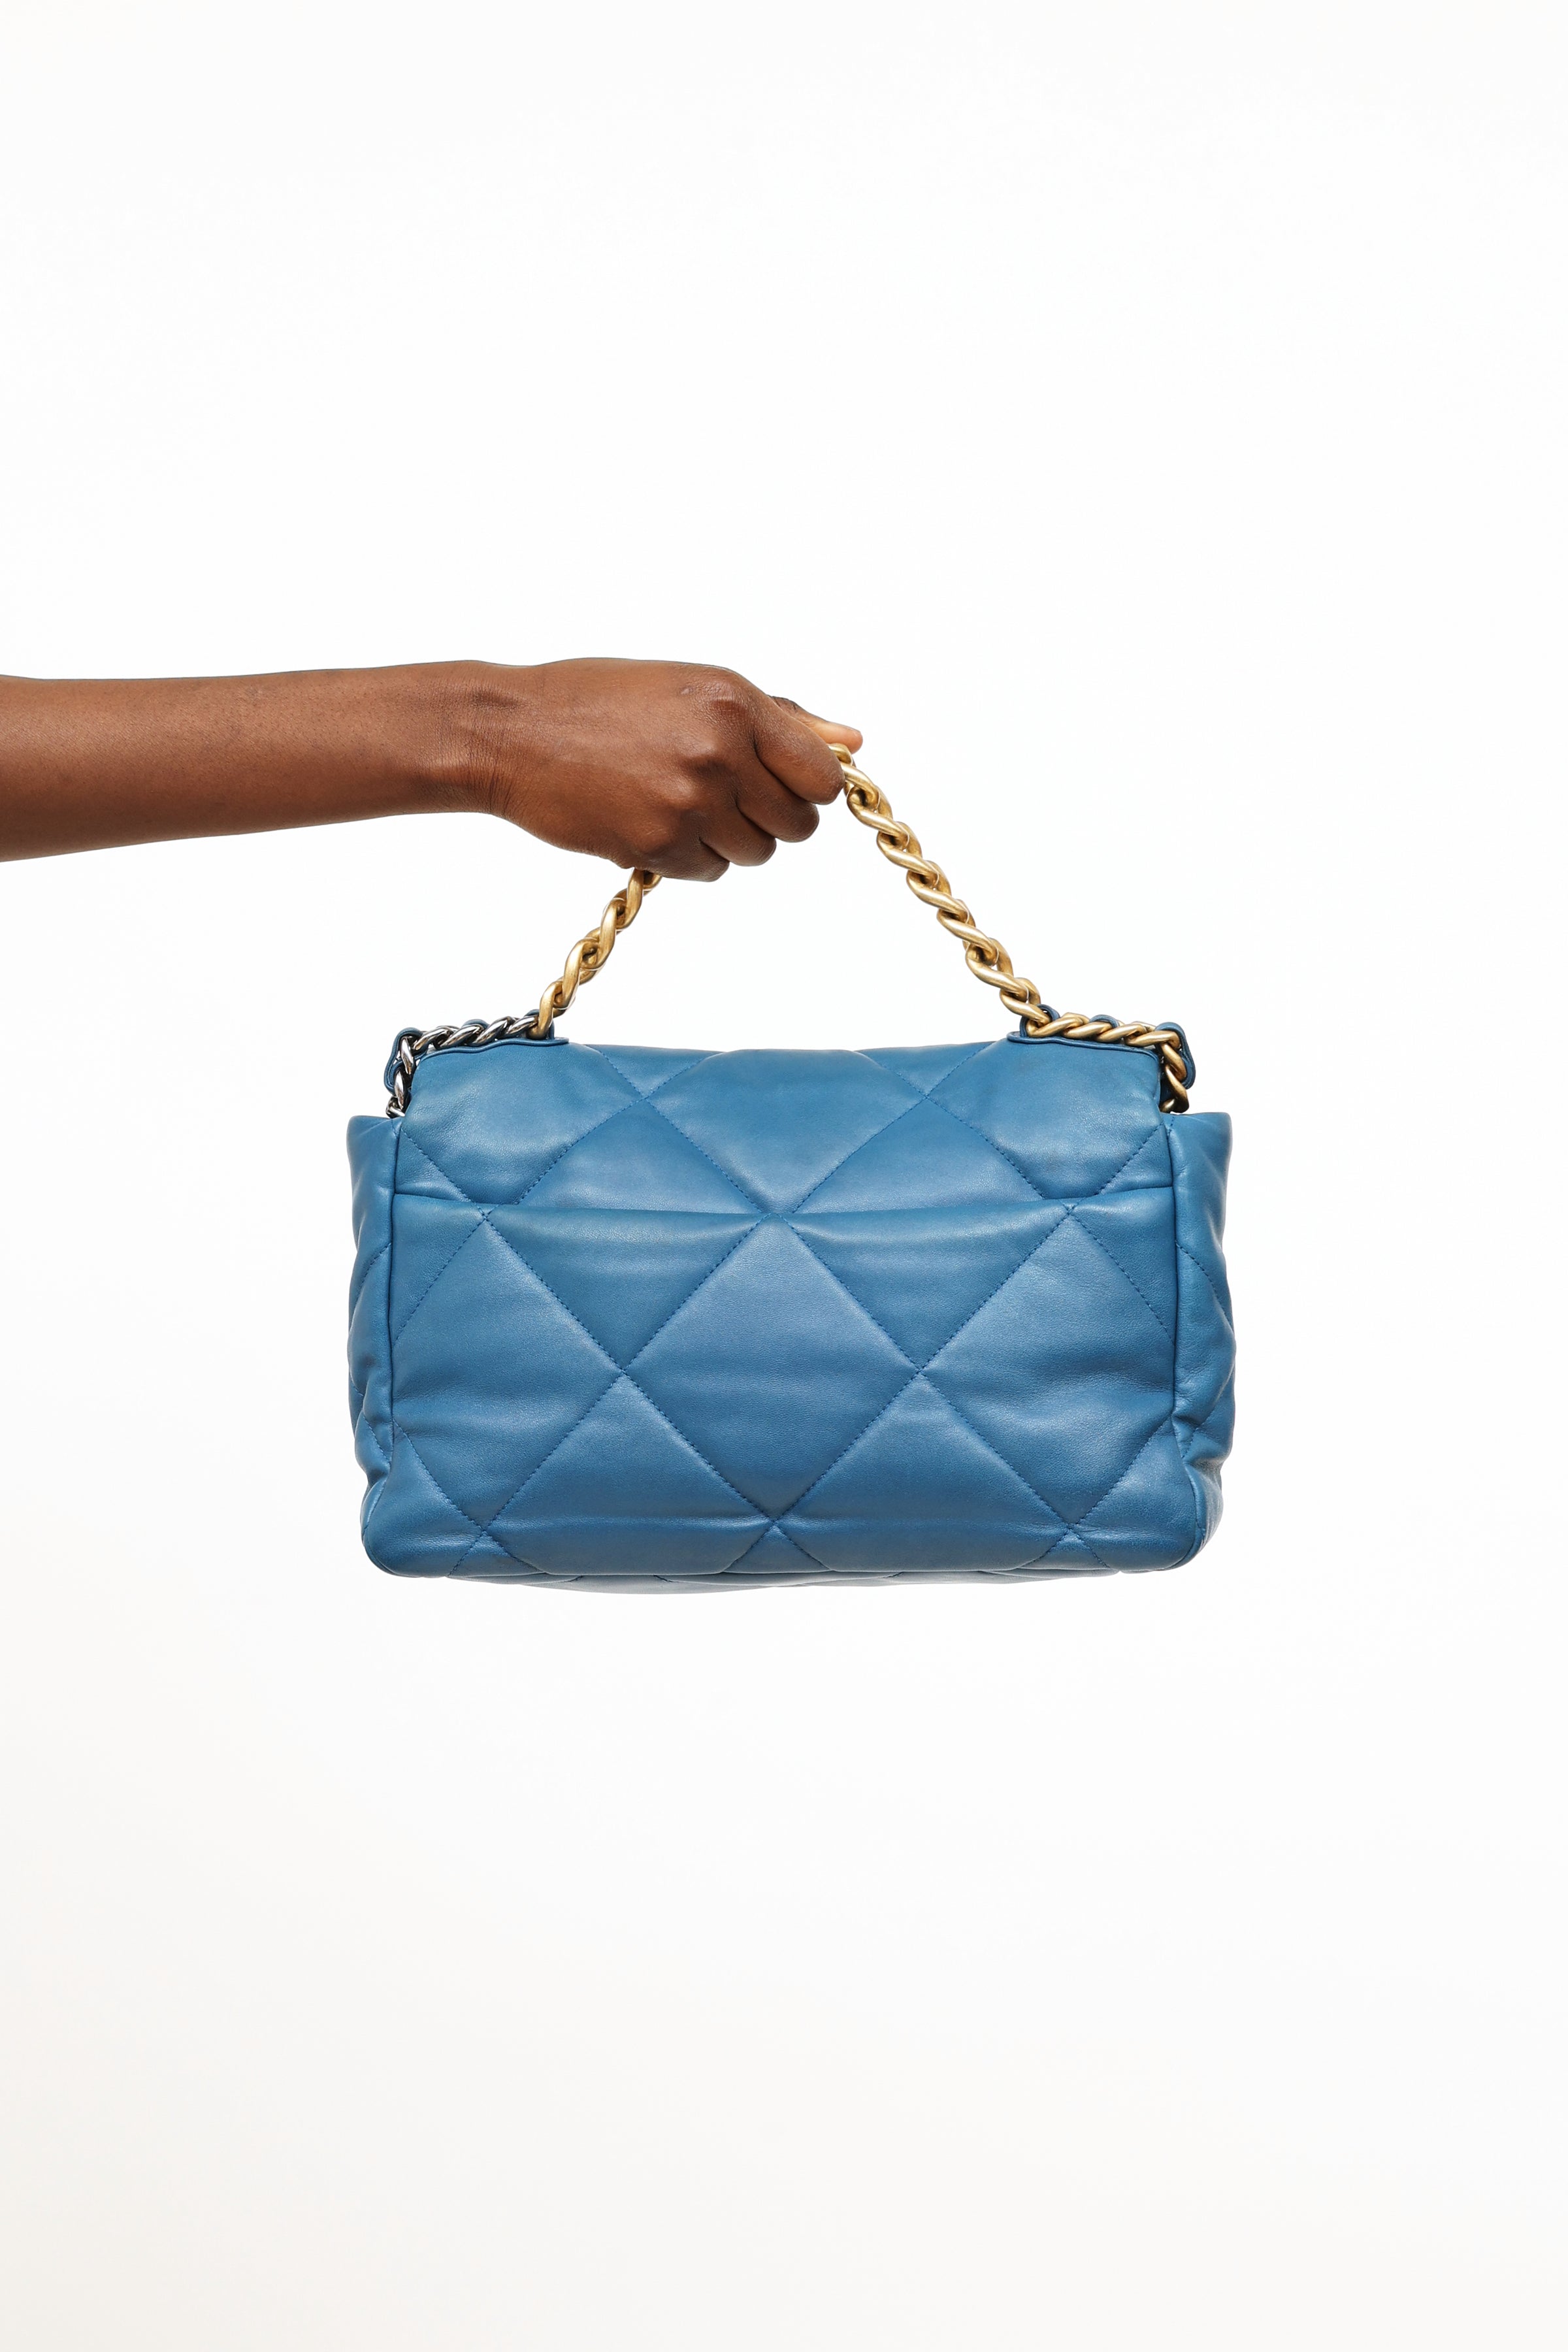 Chanel // FW 2019 Turquoise Quilted 19 Medium Flap Bag – VSP